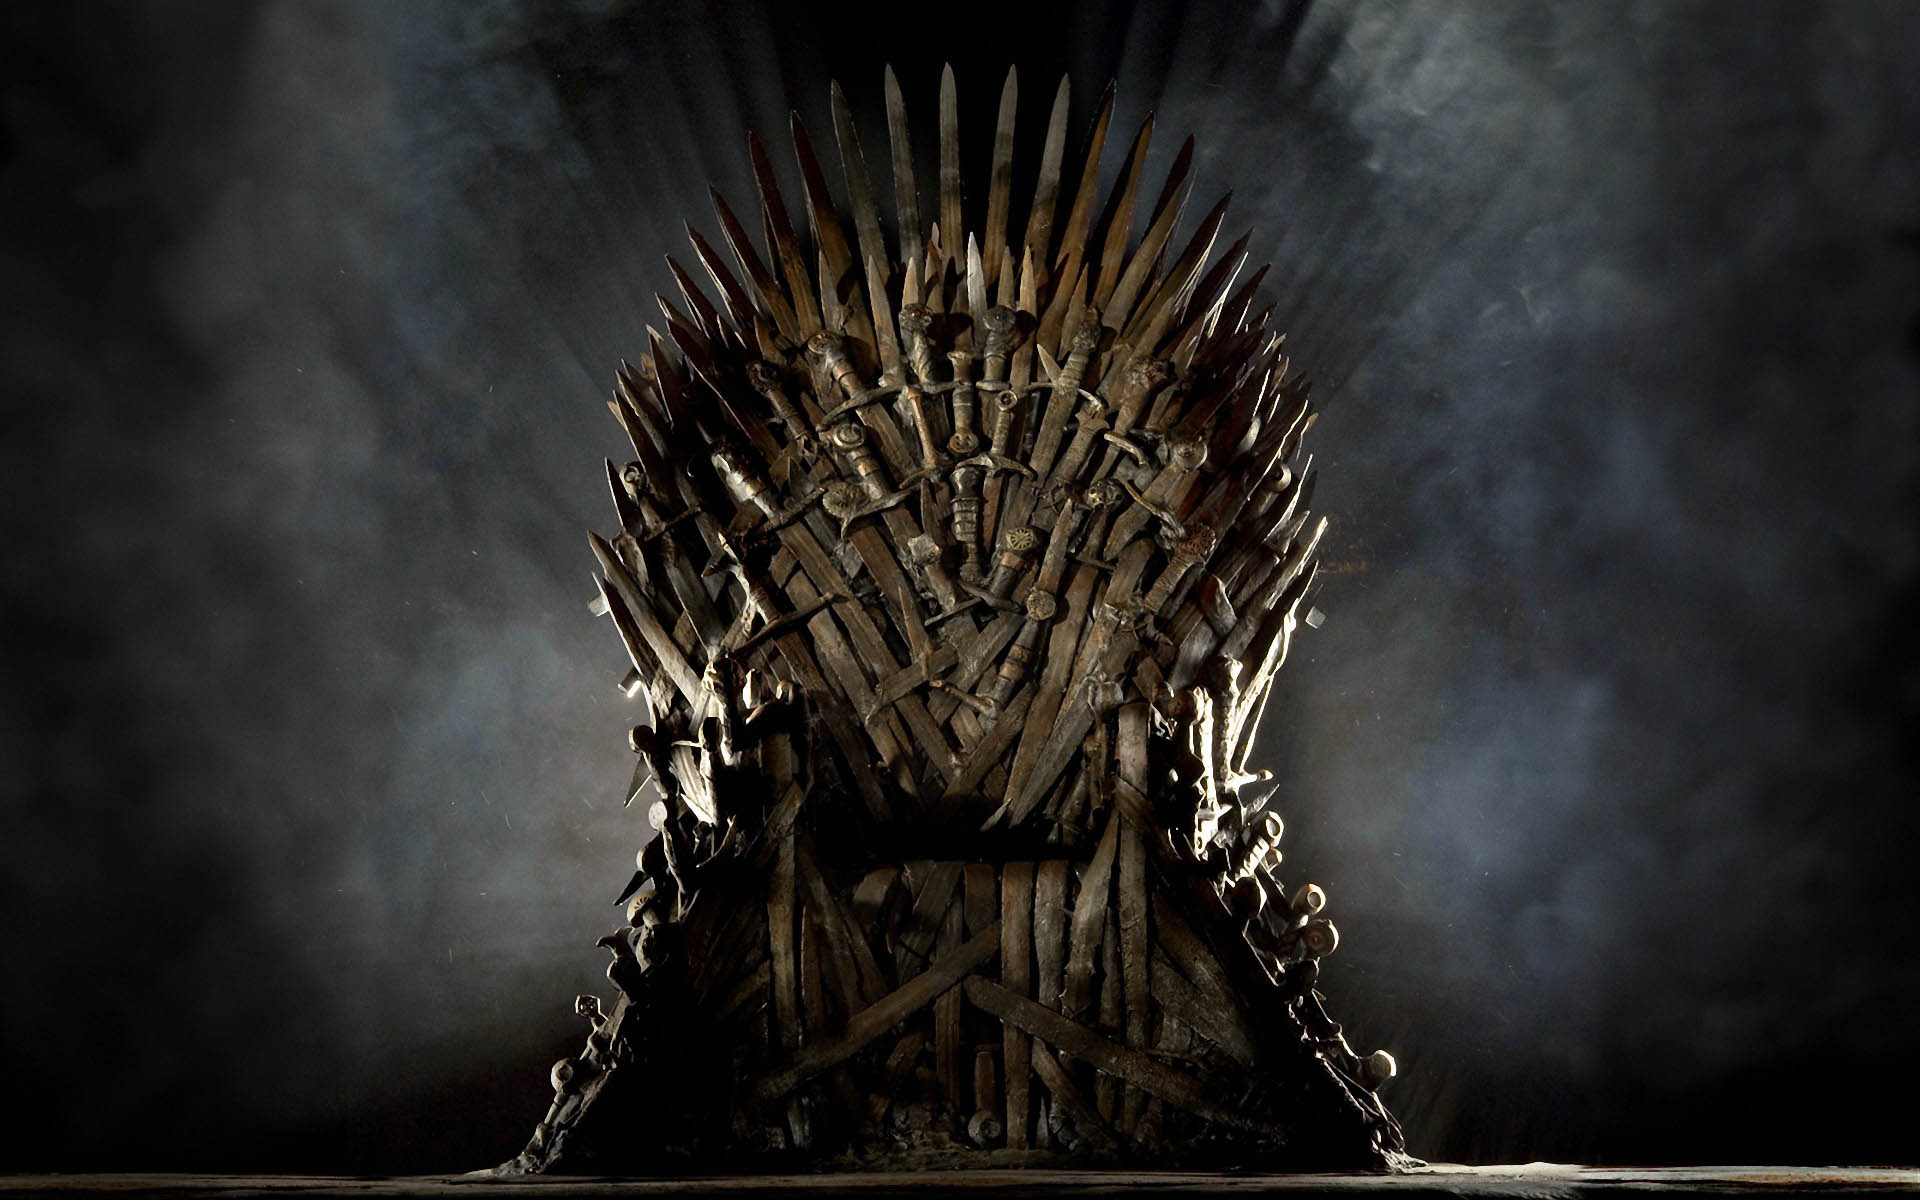 Remove 1 Character from These Famous TV Shows to Find Out What Award You’ll Win game of thrones poster_85627 1920x1200.0